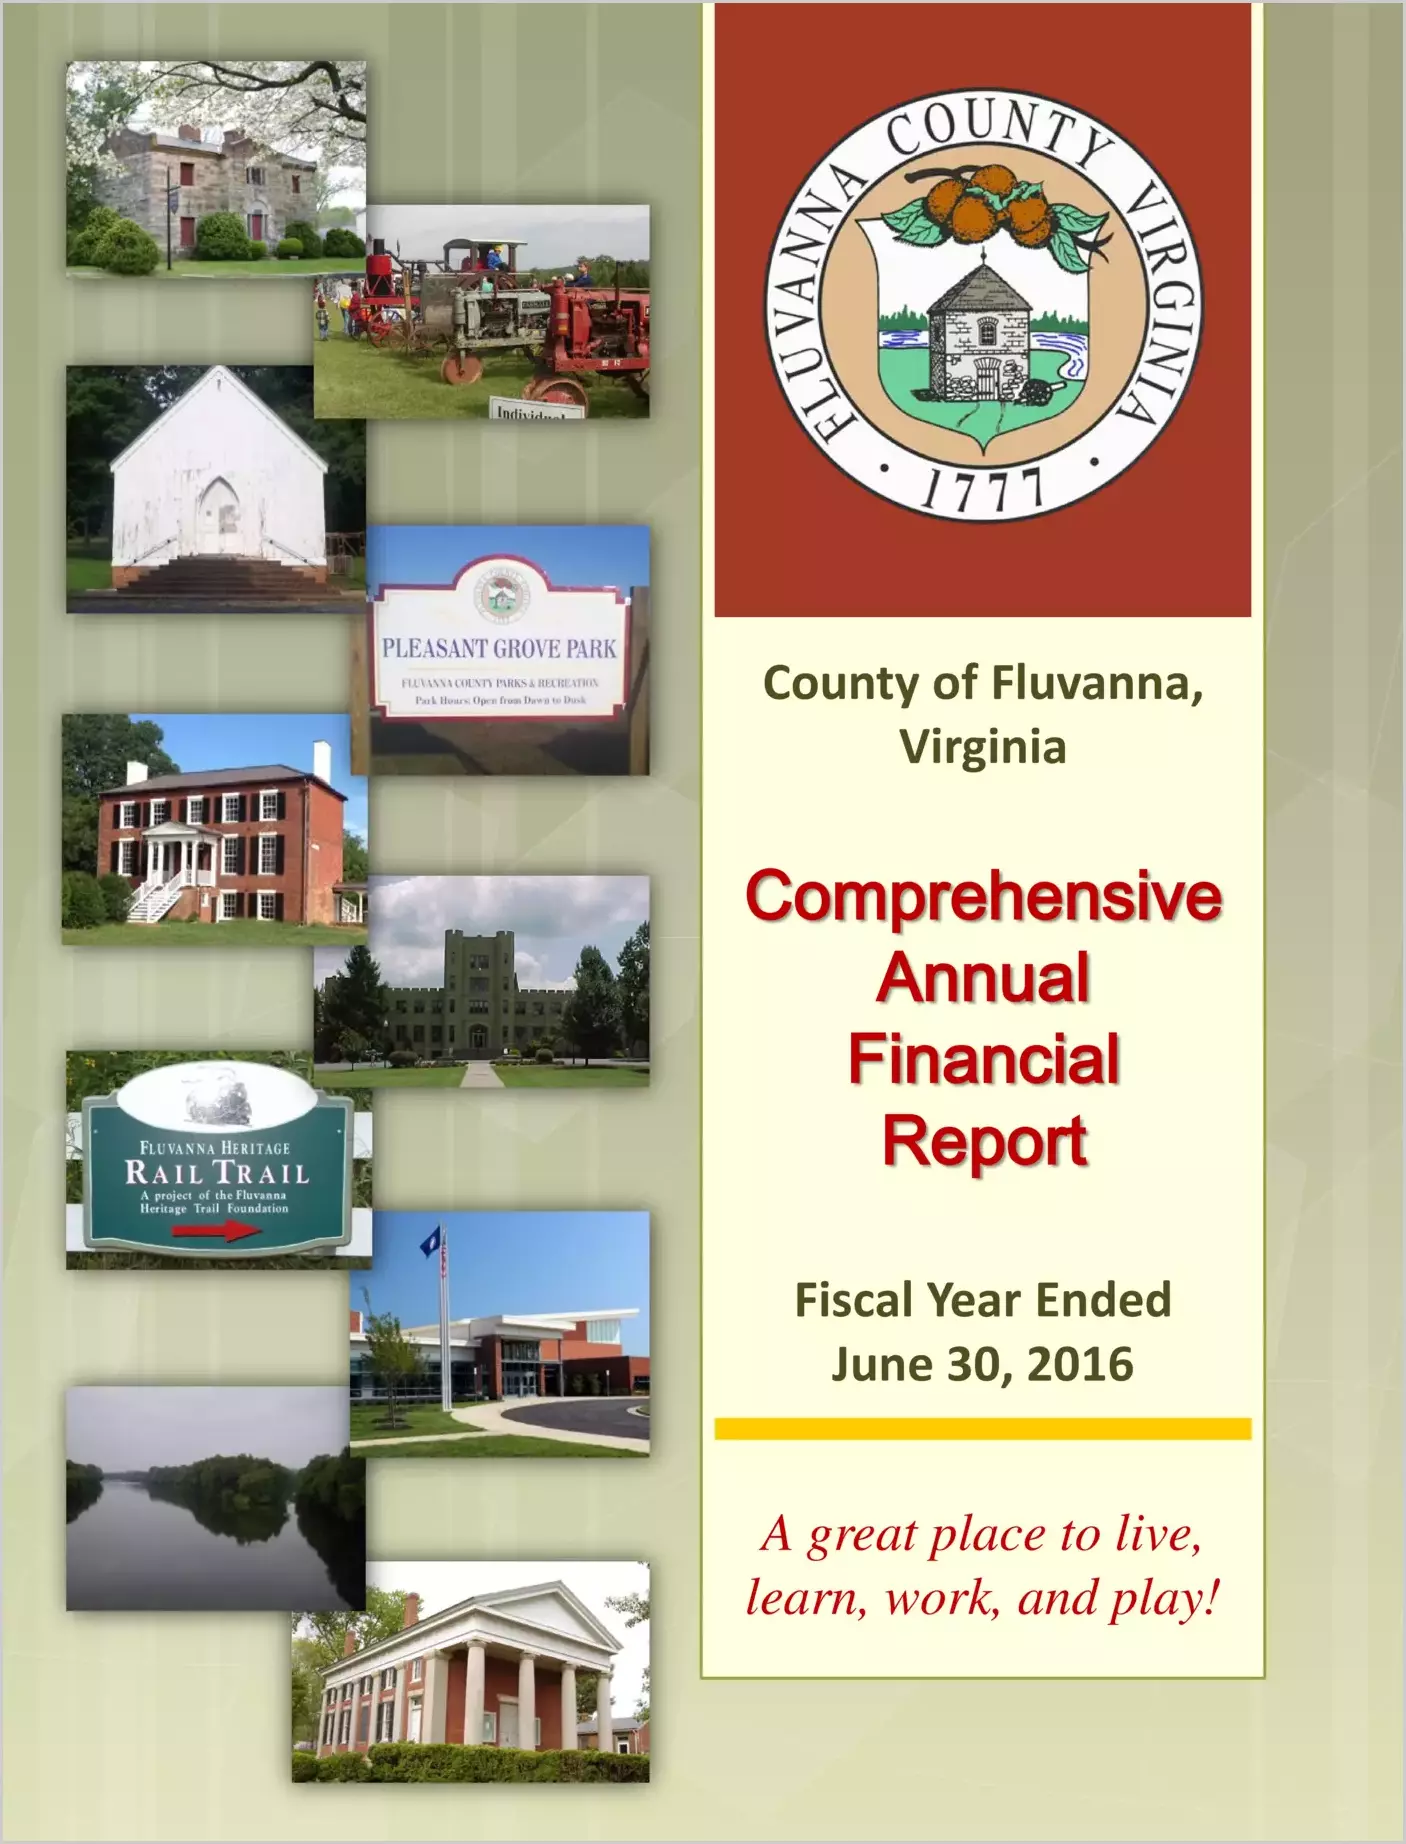 2016 Annual Financial Report for County of Fluvanna